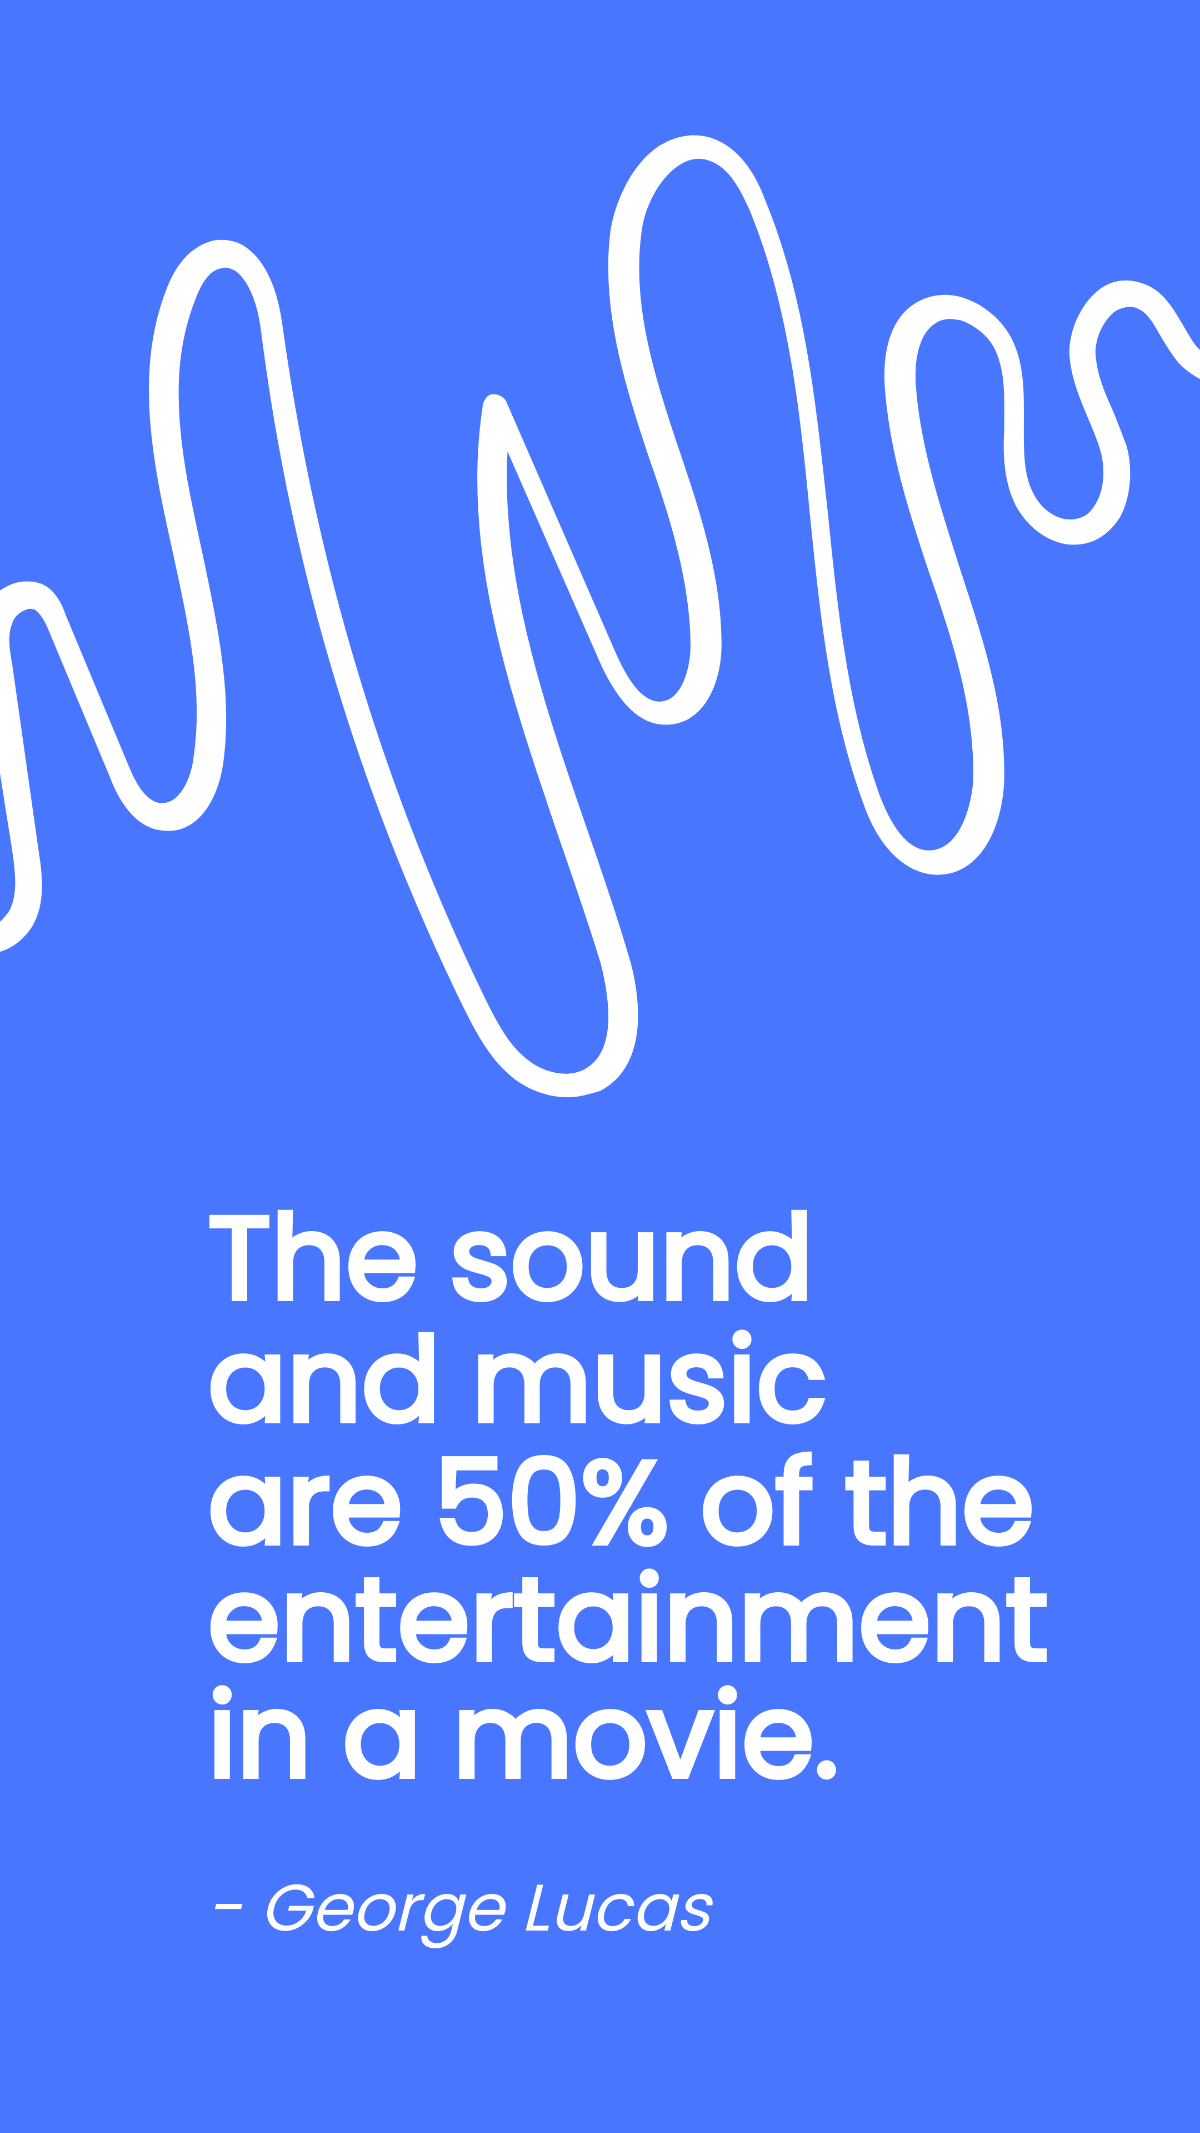 George Lucas - The sound and music are 50 of the entertainment in a movie.